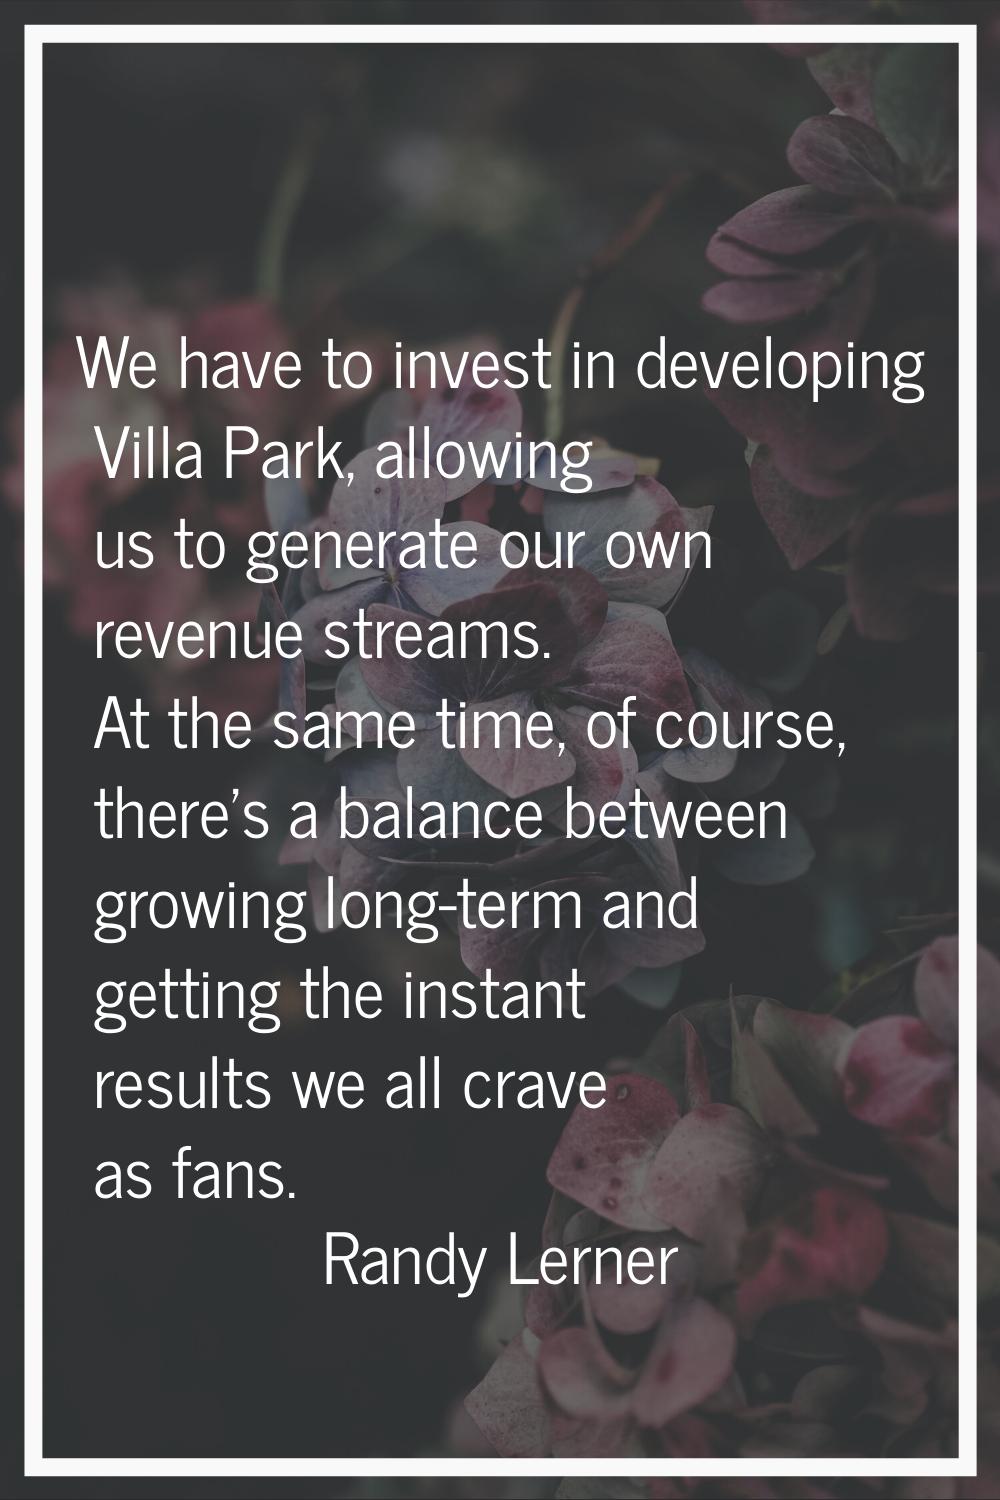 We have to invest in developing Villa Park, allowing us to generate our own revenue streams. At the